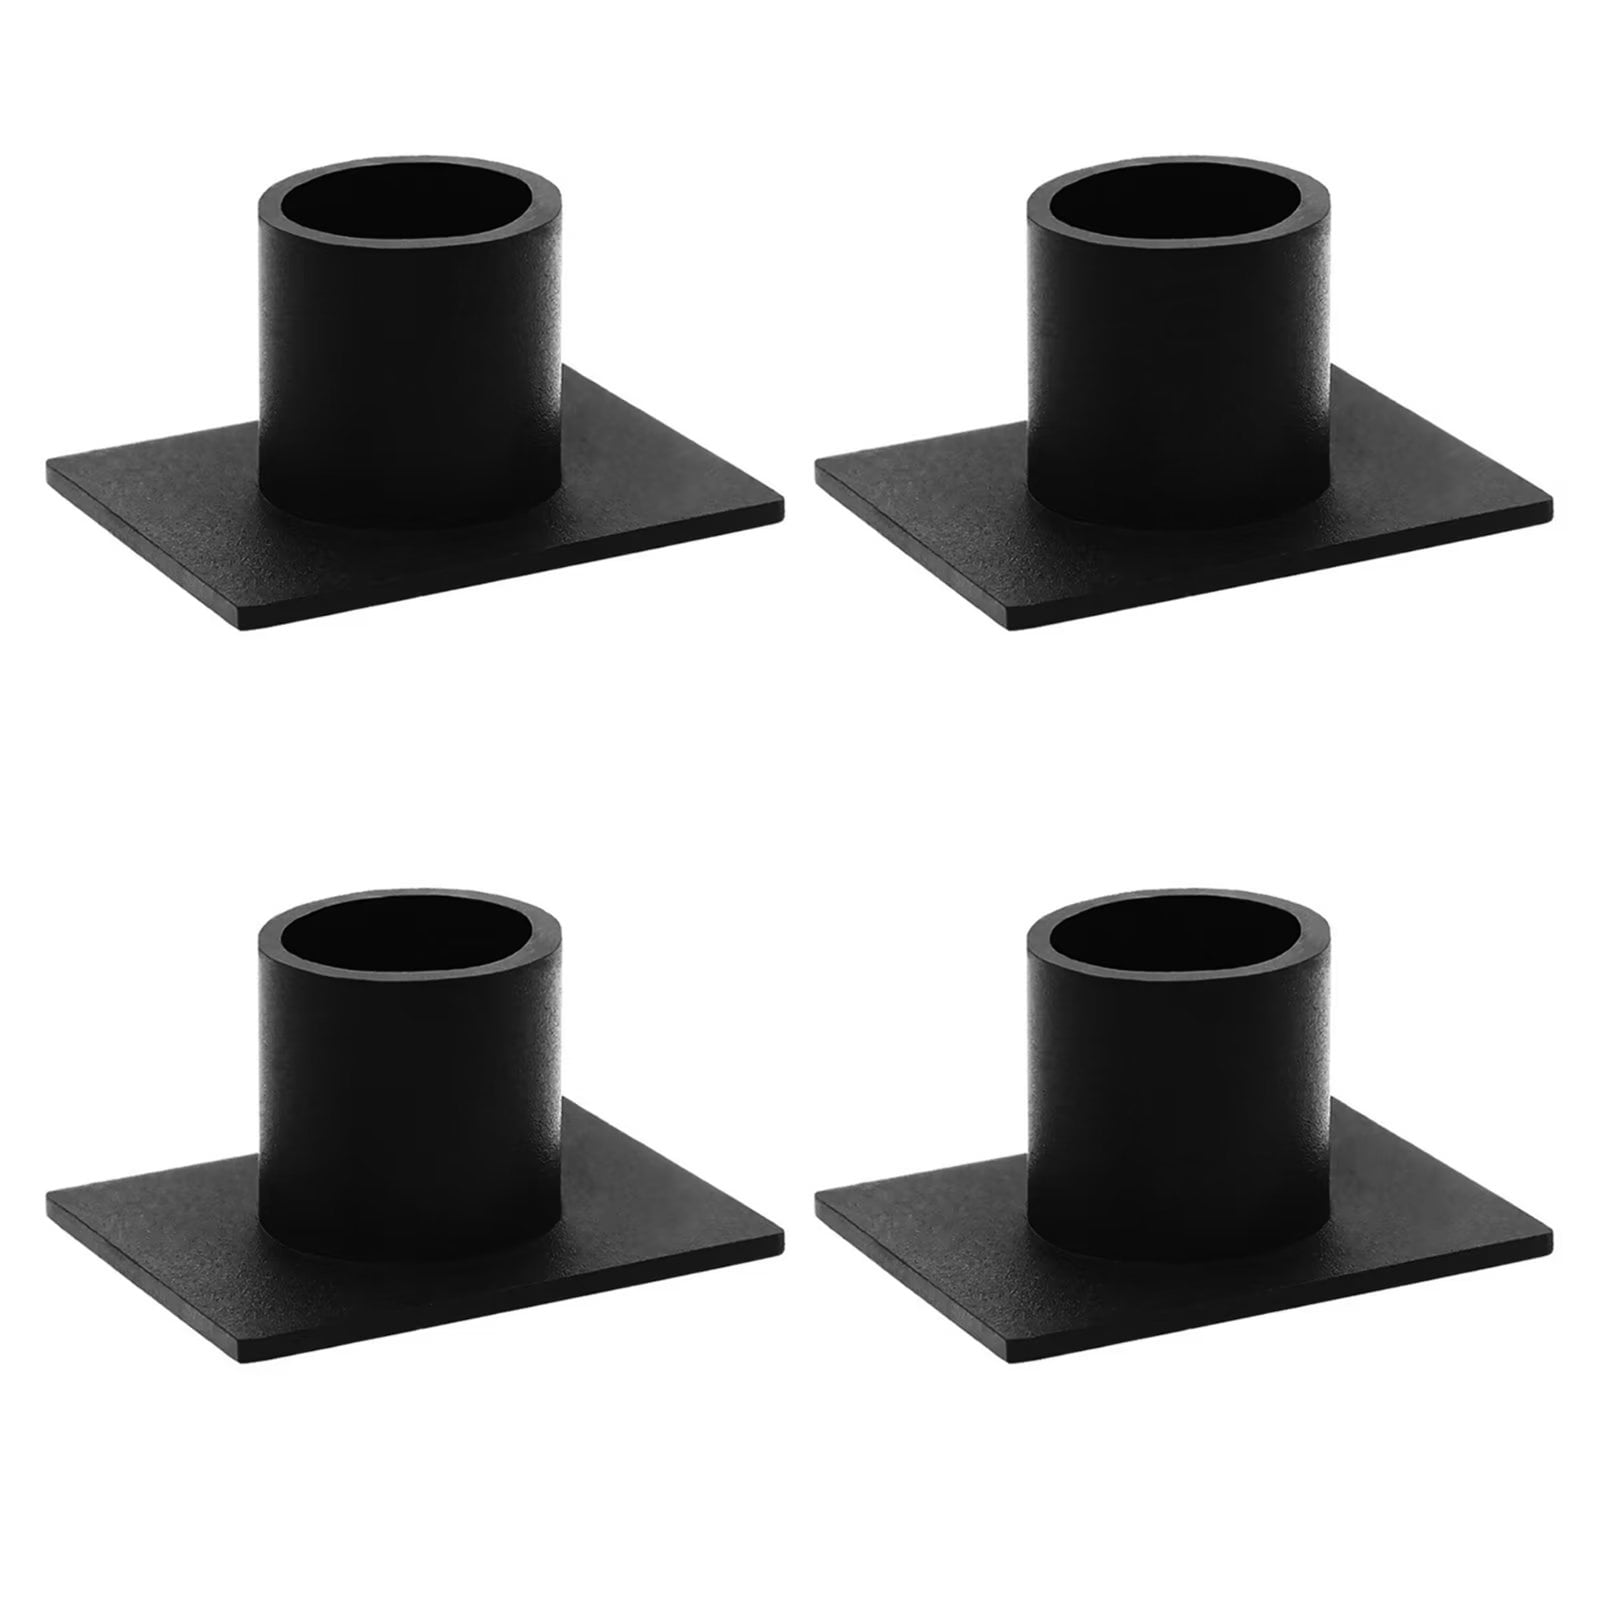 Nuptio Black Iron Candlestick Candle Holders for Halloween Dining Table ...